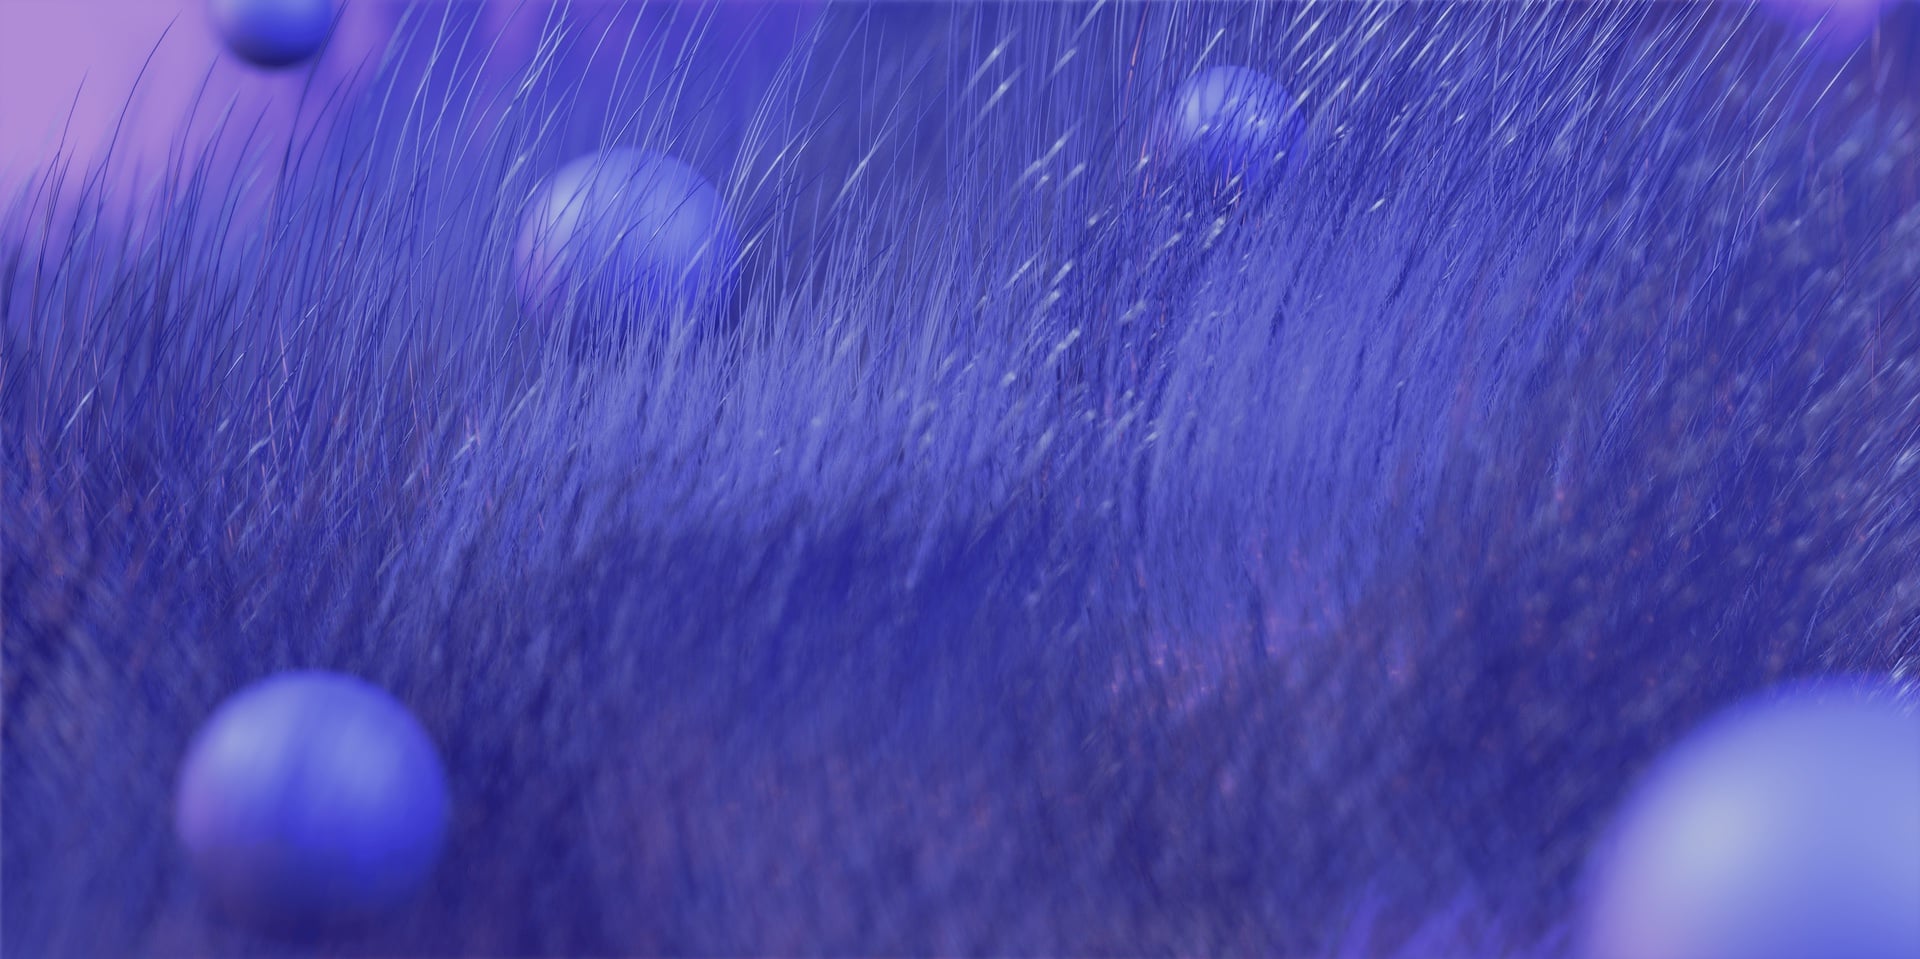 Close up of the final render, showing a landscape of violet fur with small spheres floating inbetween